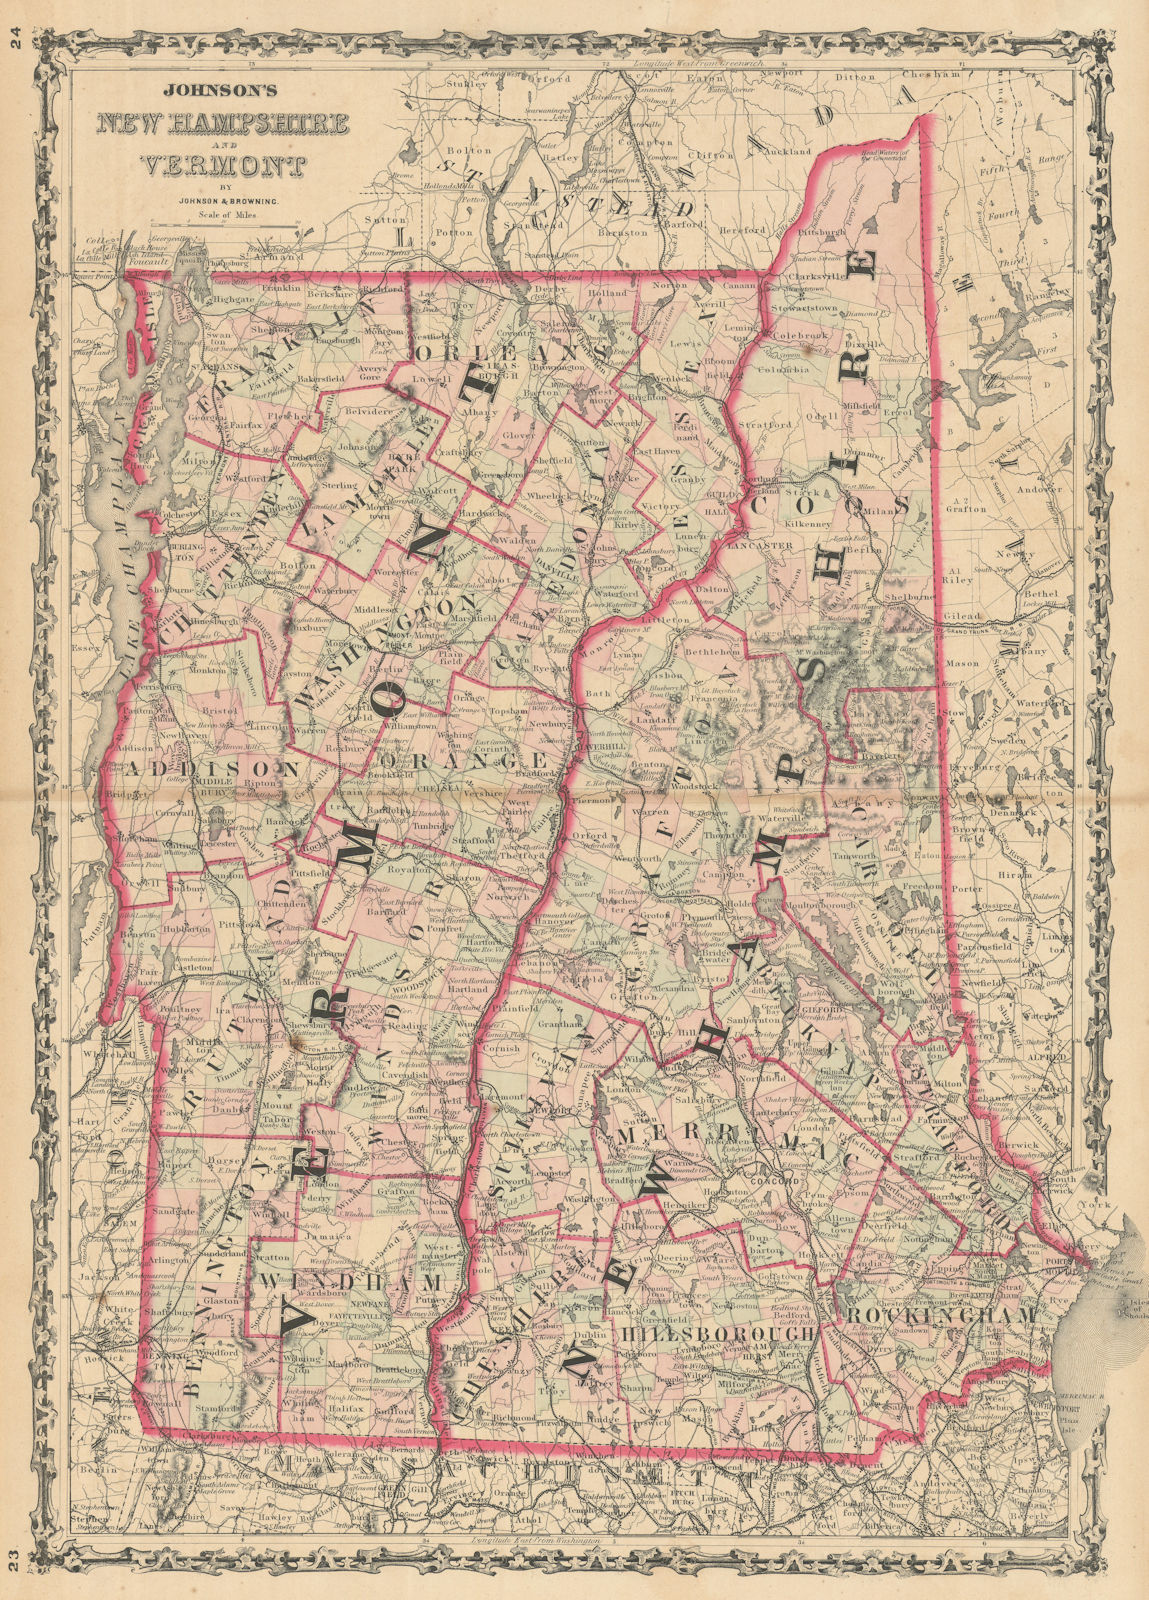 Johnson's New Hampshire & Vermont. US State map showing counties 1861 old